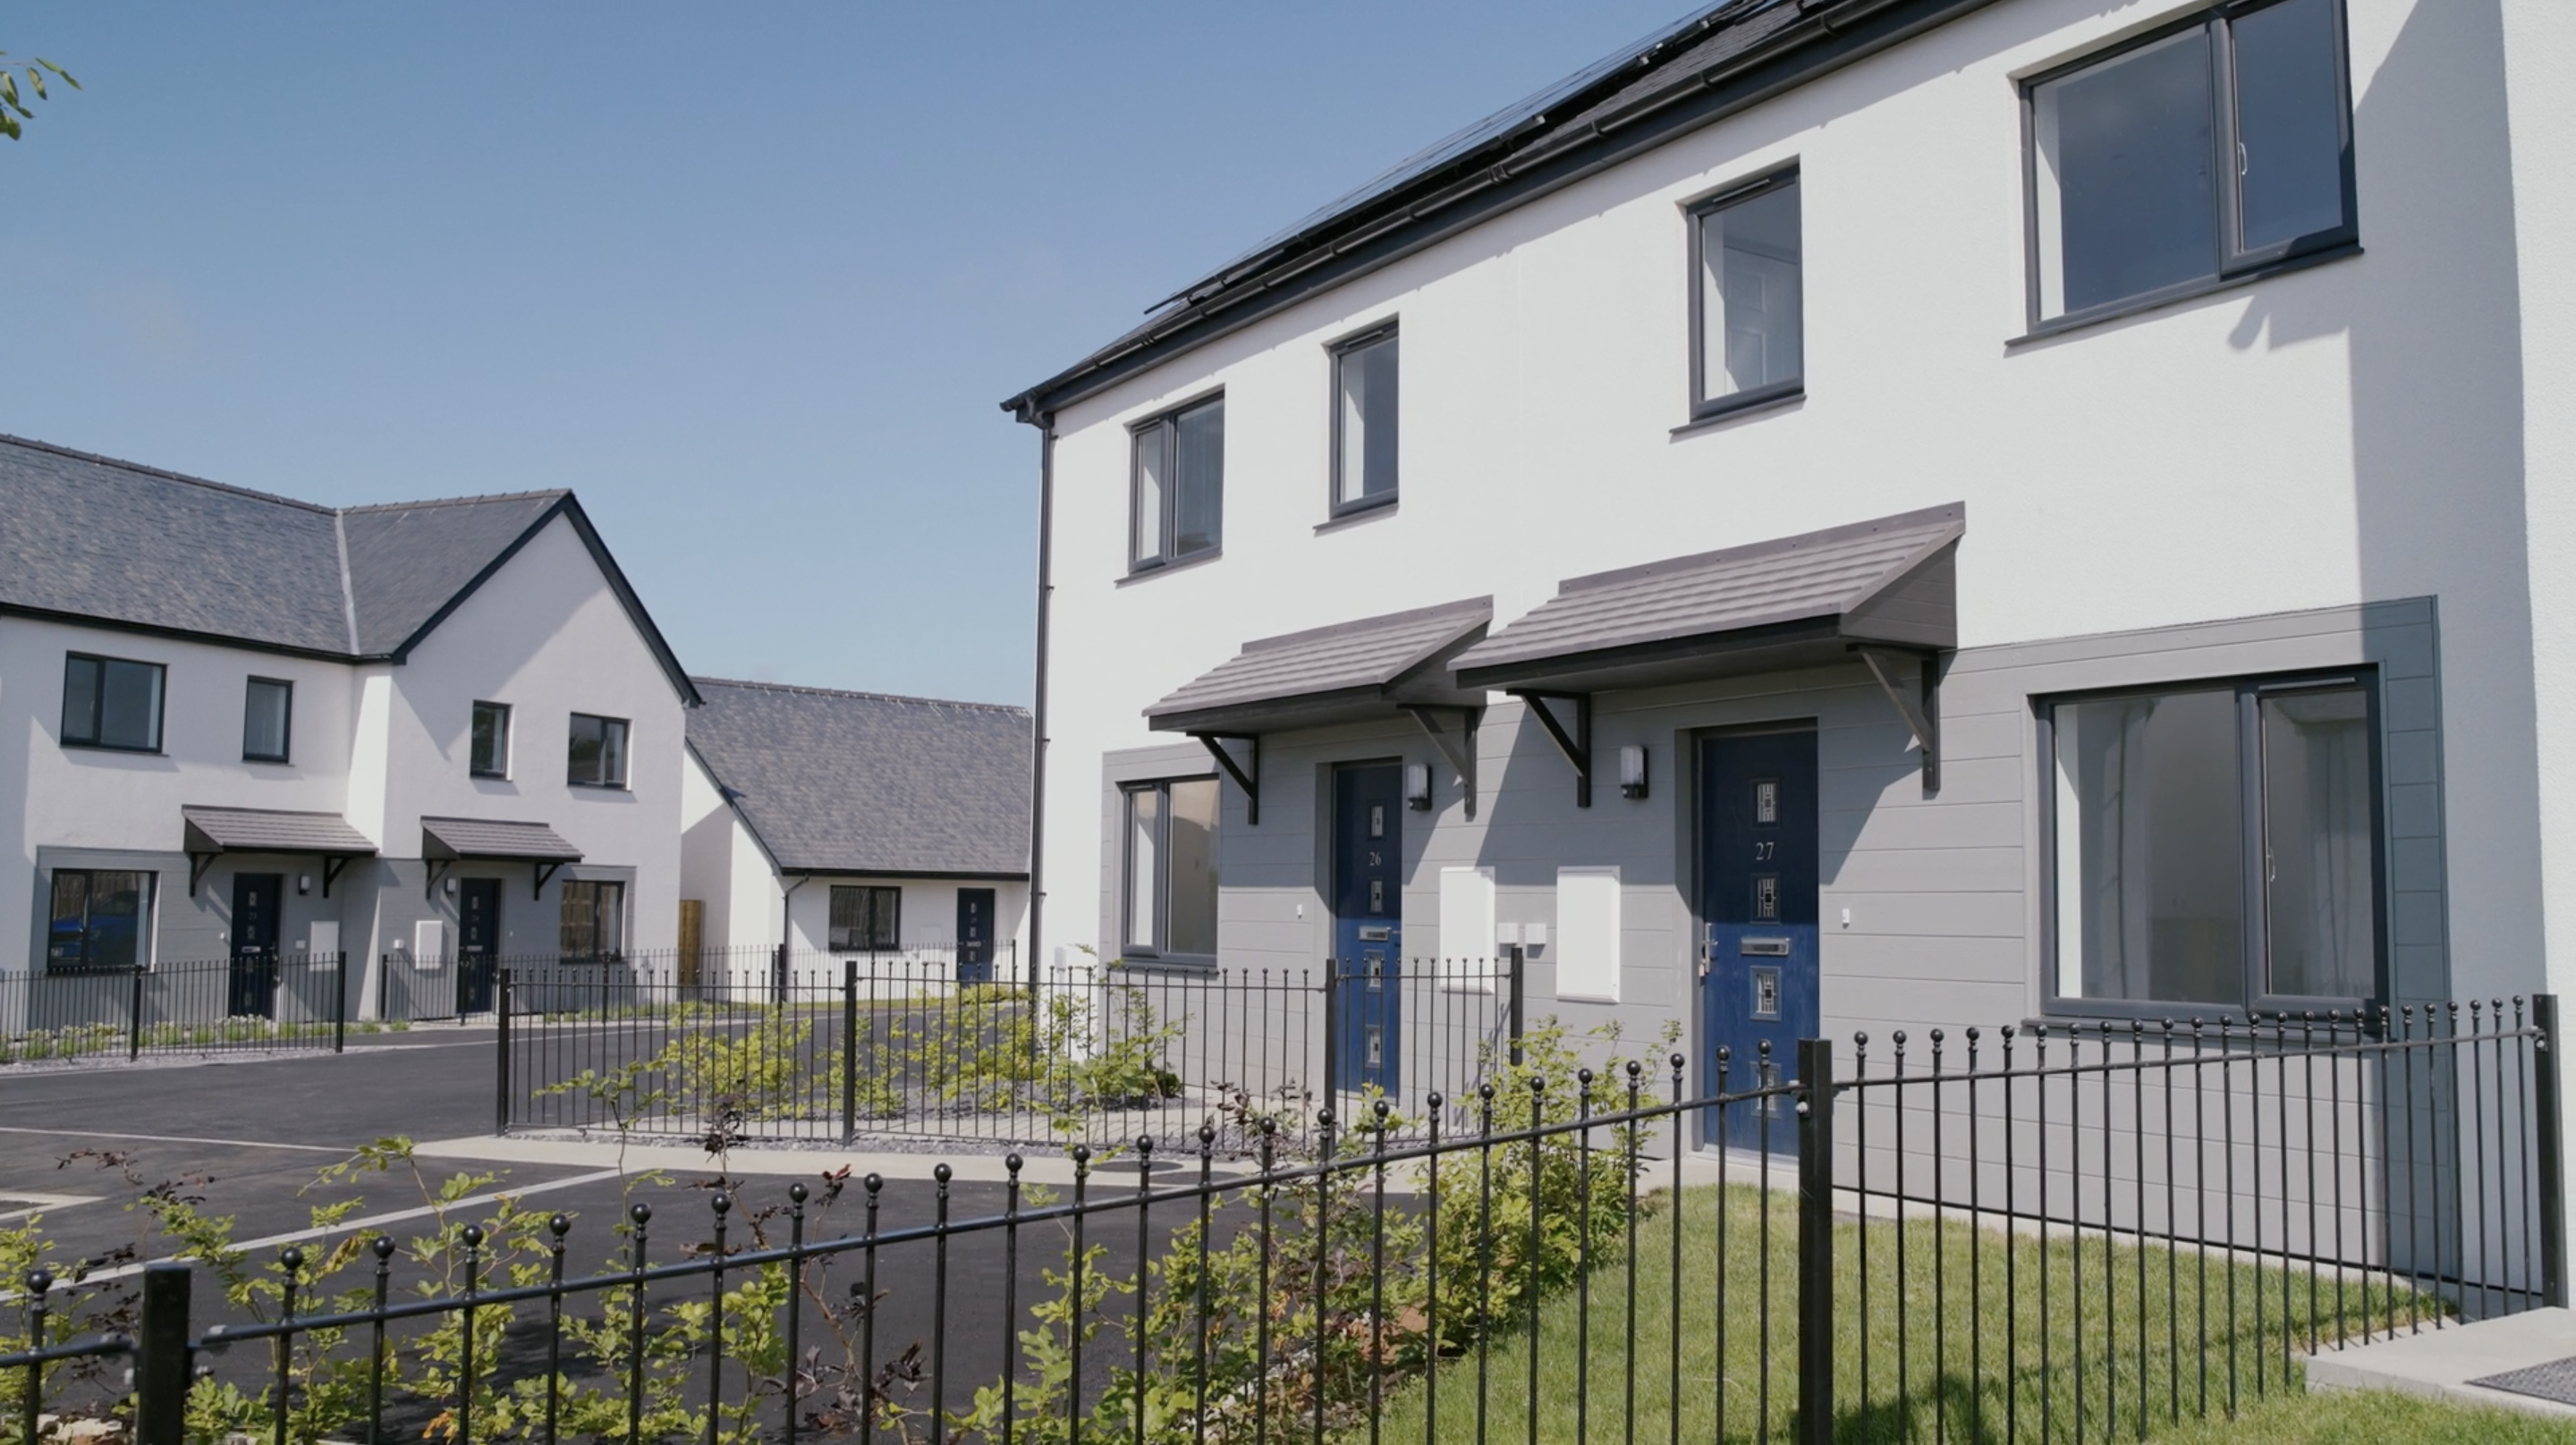 New energy efficient homes transform lives in Brynsiencyn